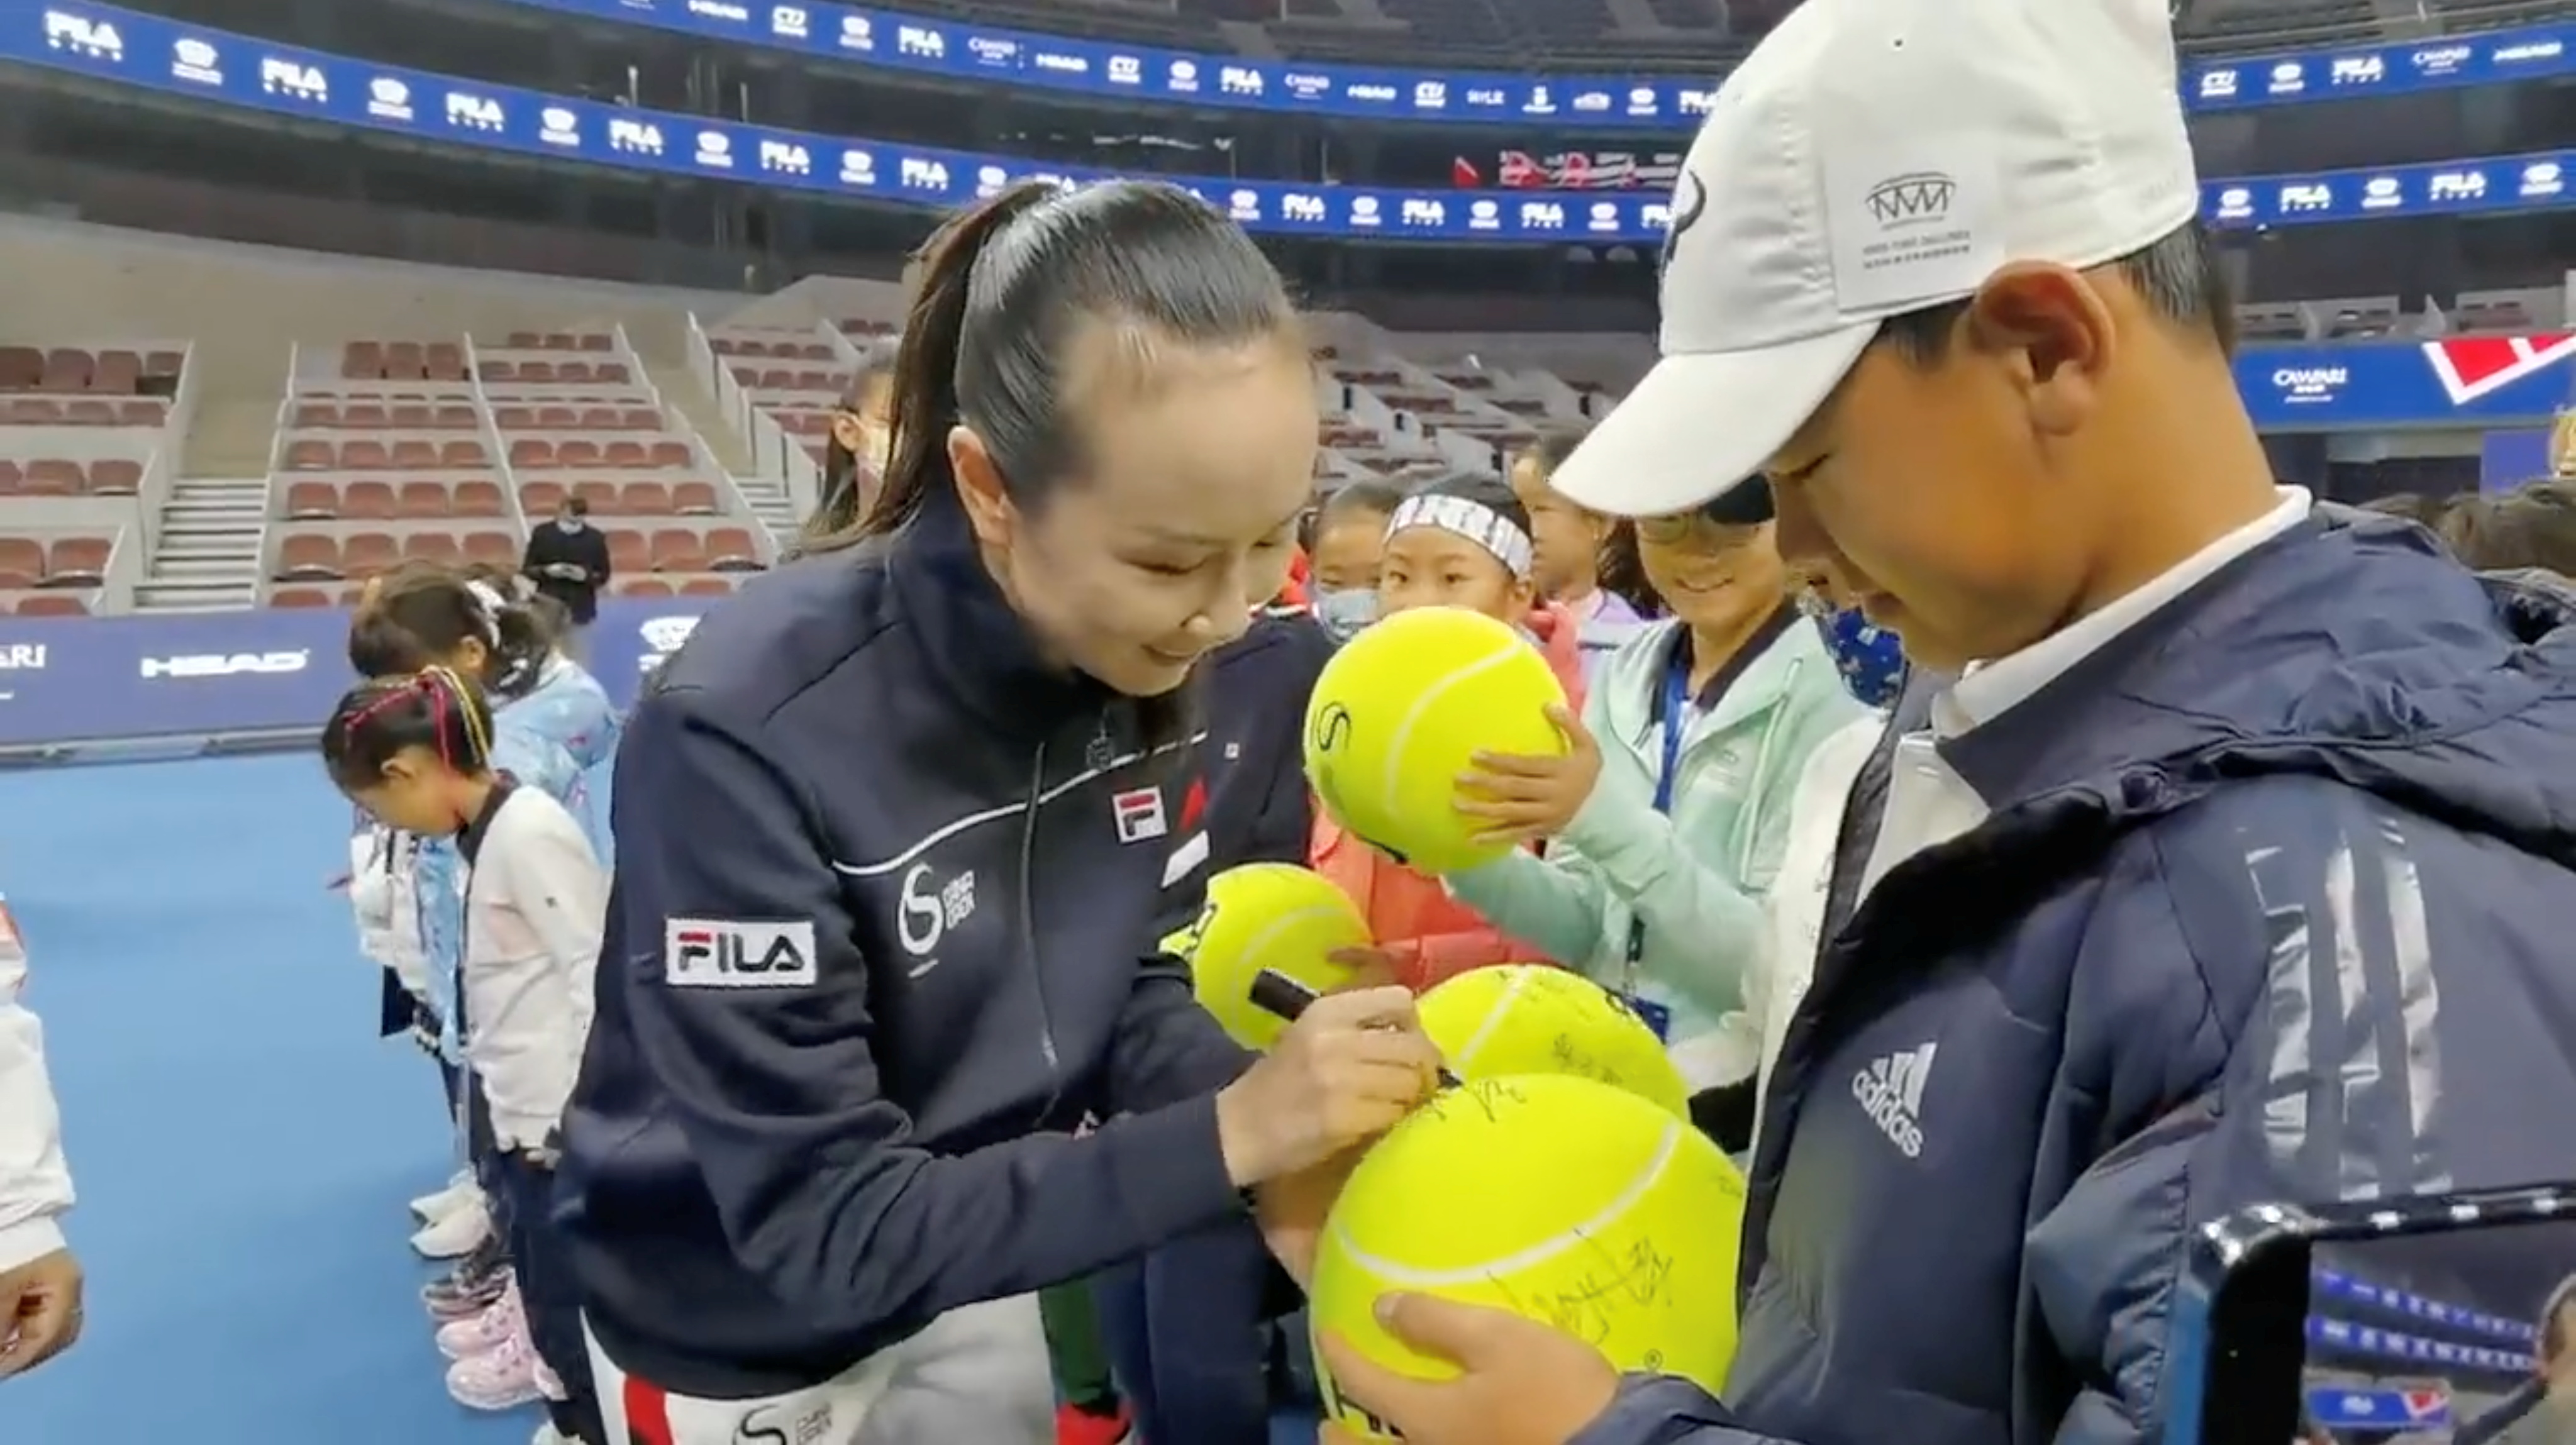 Chinese tennis player Peng Shuai signs large-sized tennis balls at the opening ceremony of Fila Kids Junior Tennis Challenger Final in Beijing, China November 21, 2021, in this screen grab obtained from a social media video. TWITTER @QINGQINGPARIS via REUTERS